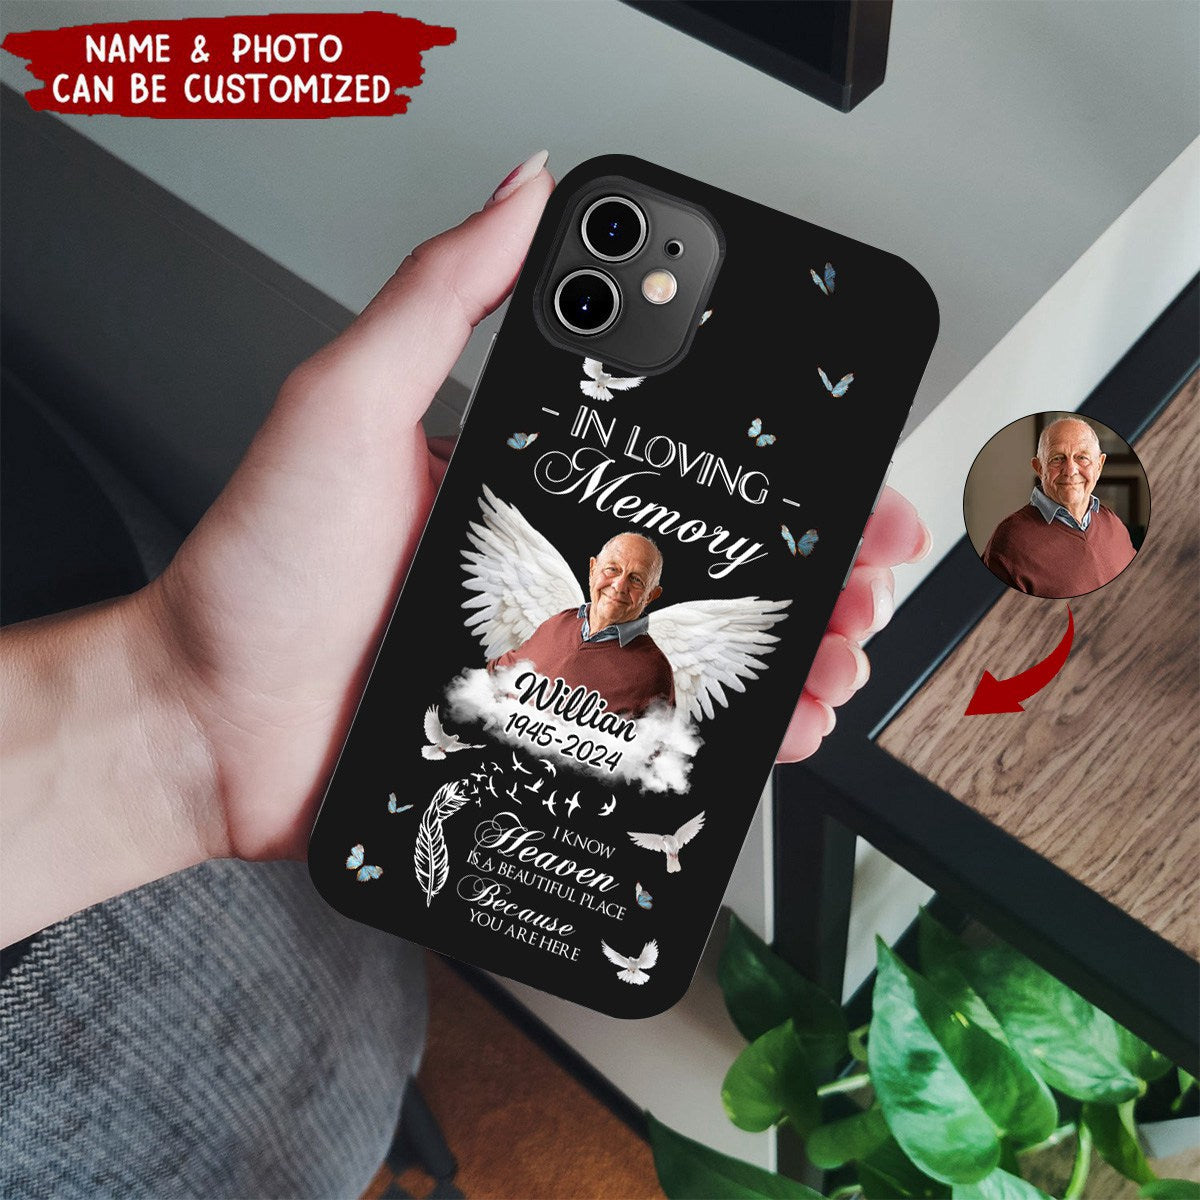 Personalized Memorial Custom Photo Wings Forever In My Heart Phone Case